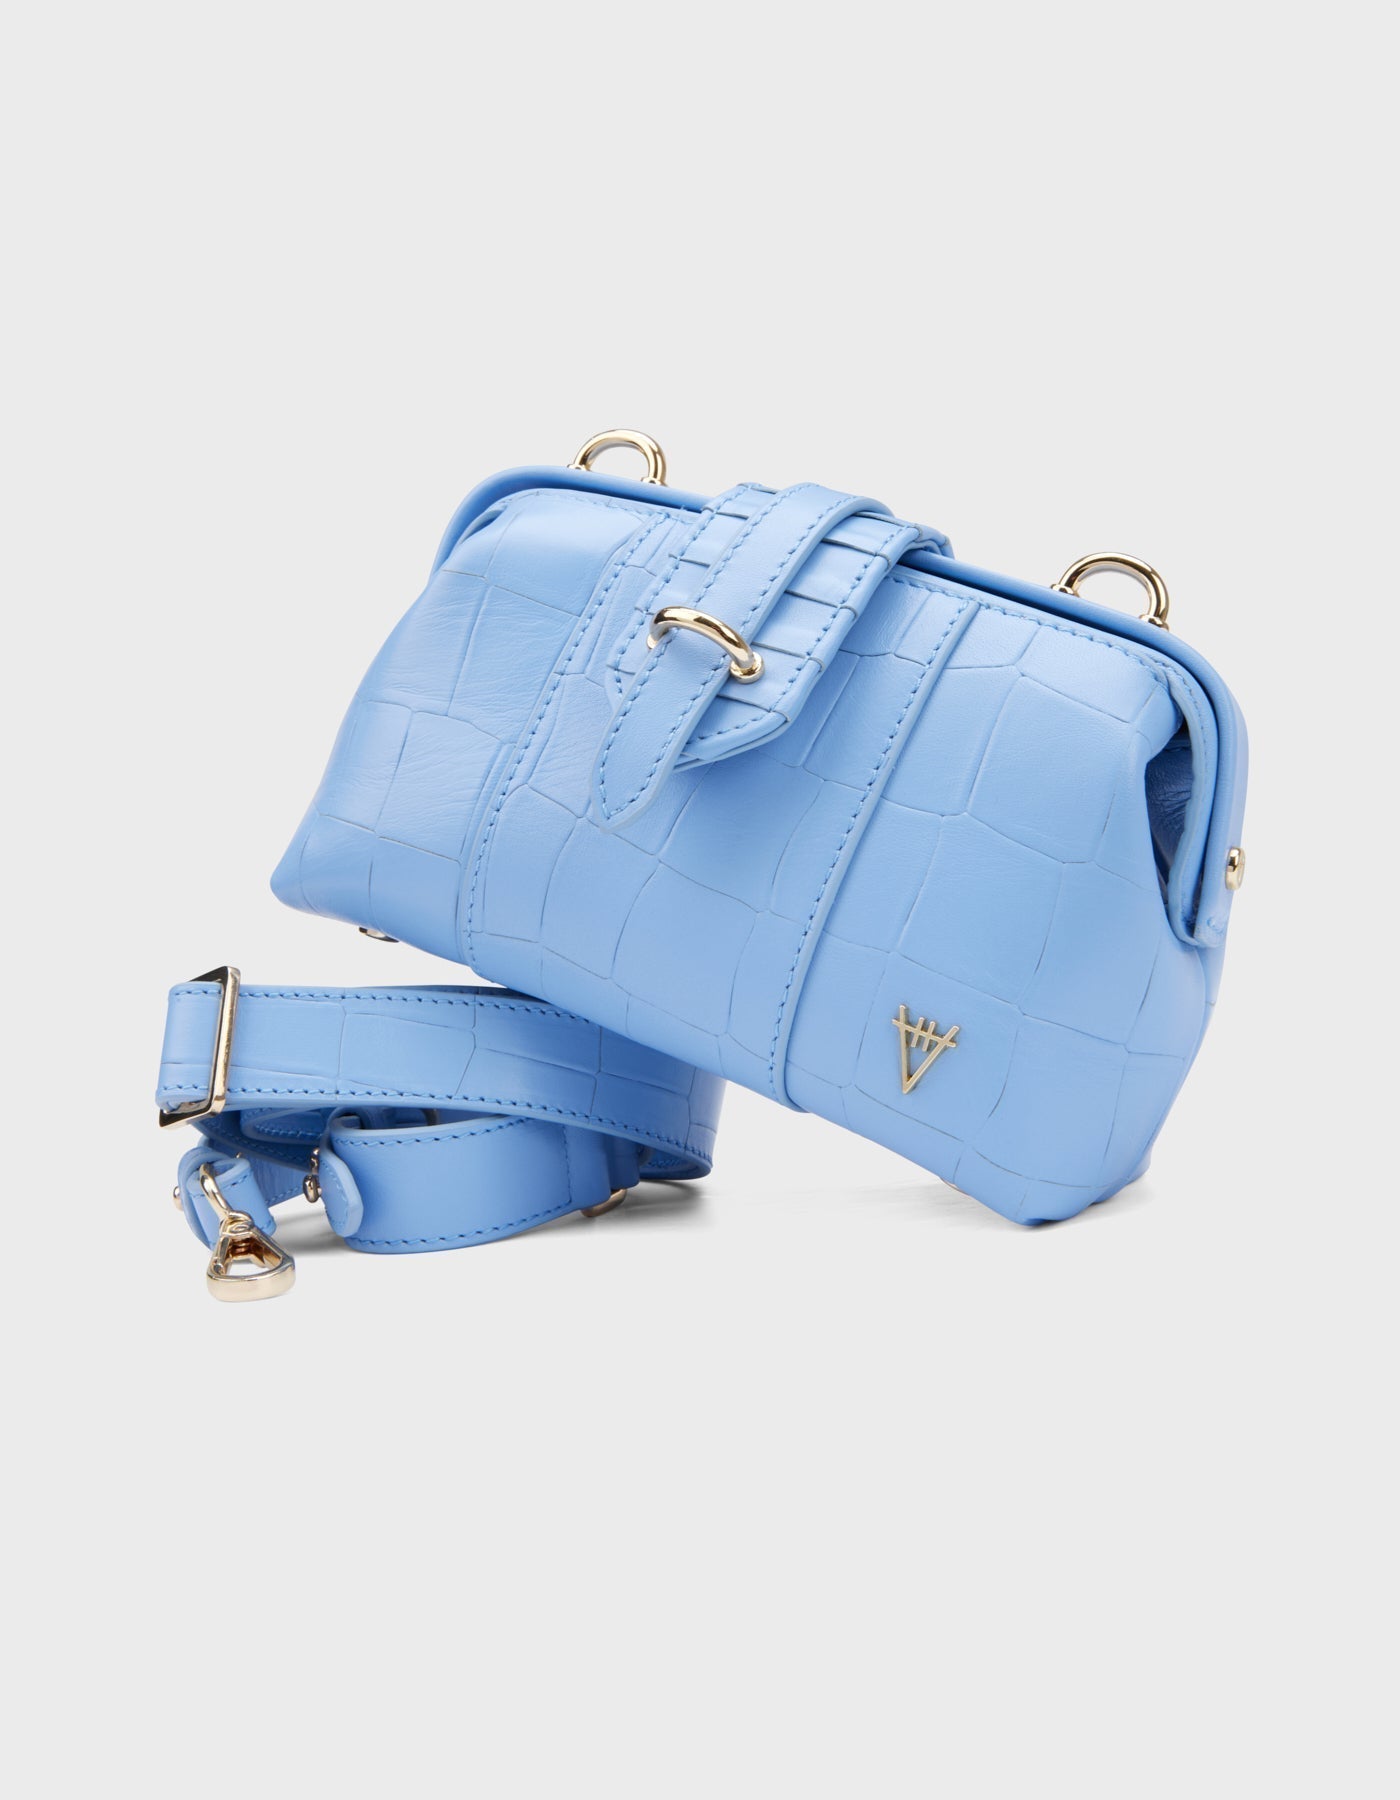 HiVa Atelier | Mini Nubes Doctor Bag Tranquil Blue | Beautiful and Versatile Leather Accessories